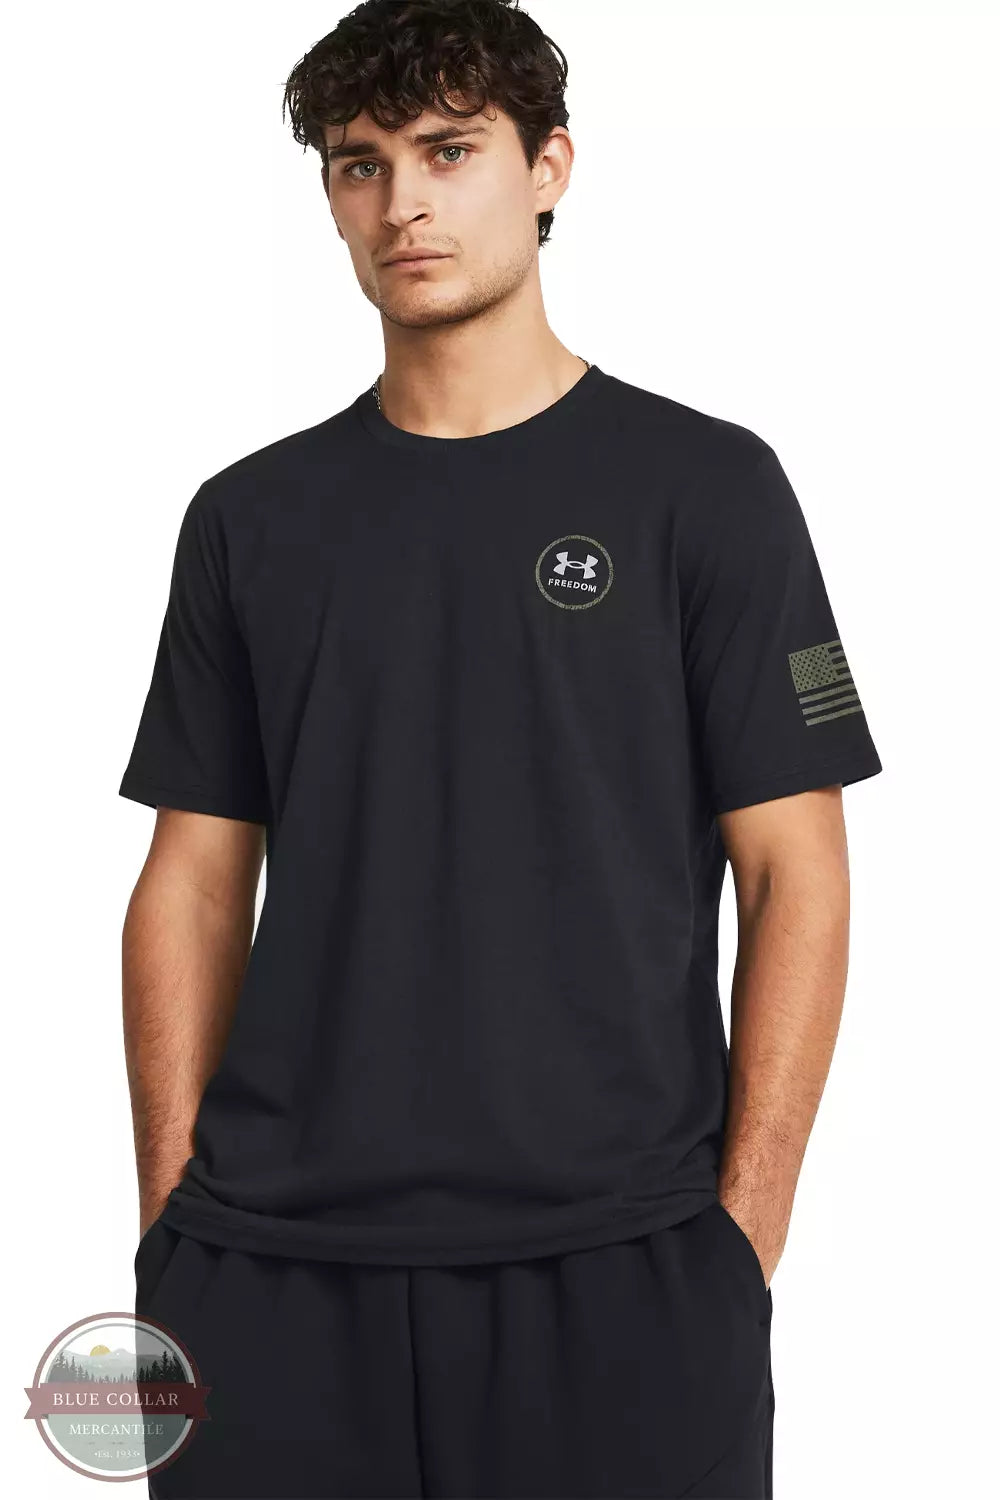 Under Armour 1382996 Freedom Mission Made T-Shirt Black Marine Green Front View